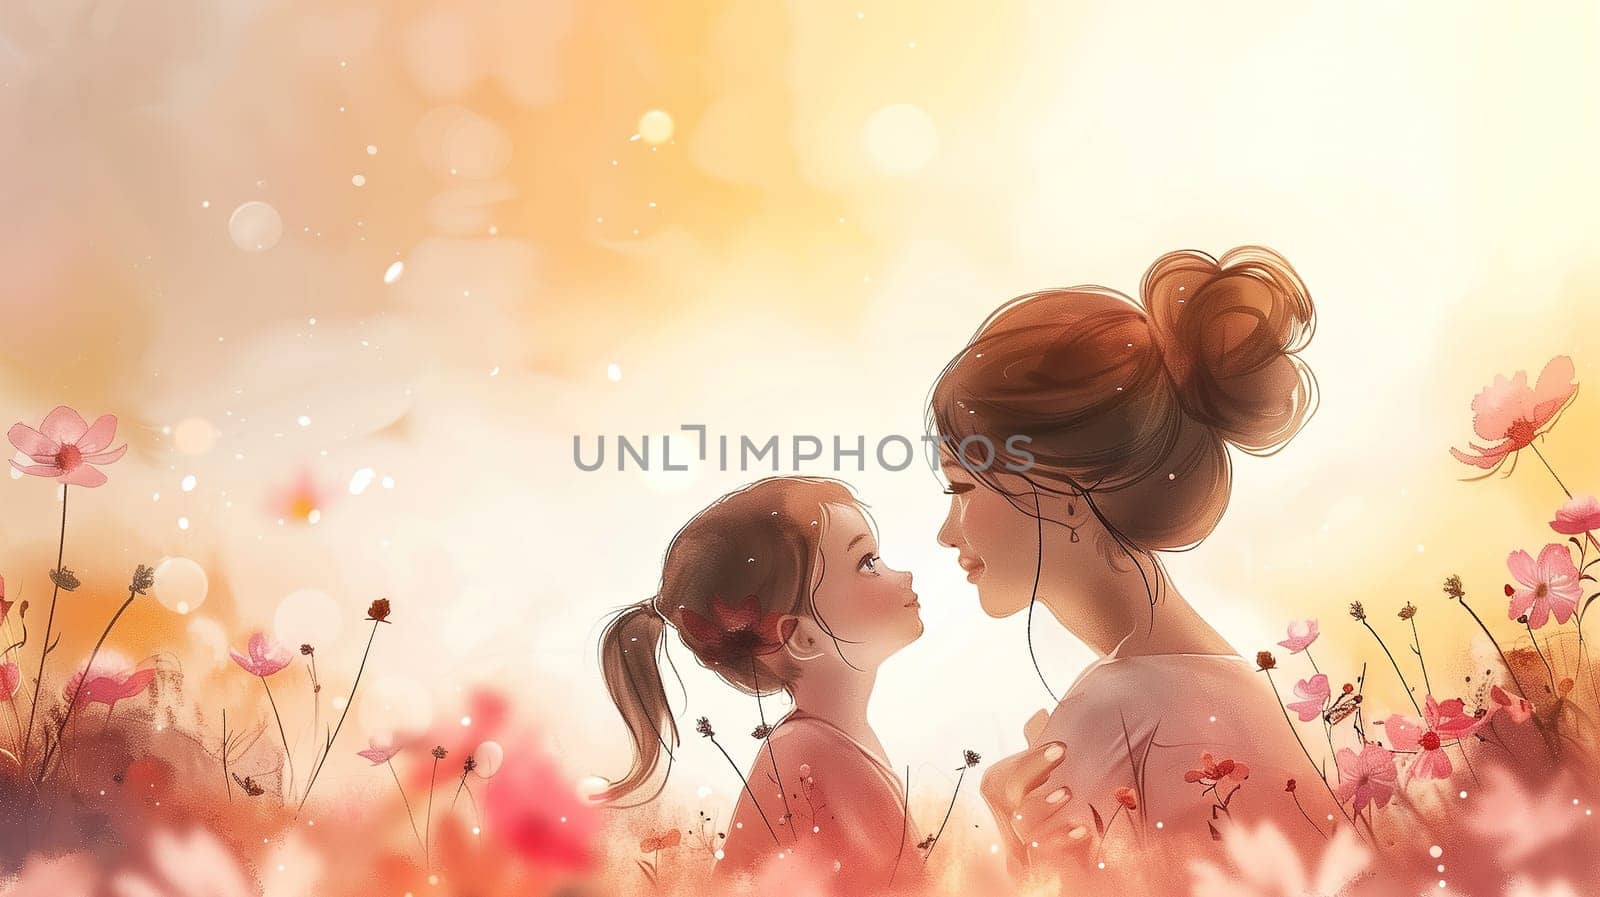 A mother and her daughter are standing together in a vibrant field filled with colorful flowers. The two are surrounded by the beauty of nature as they share a special moment together on International Mothers Day.